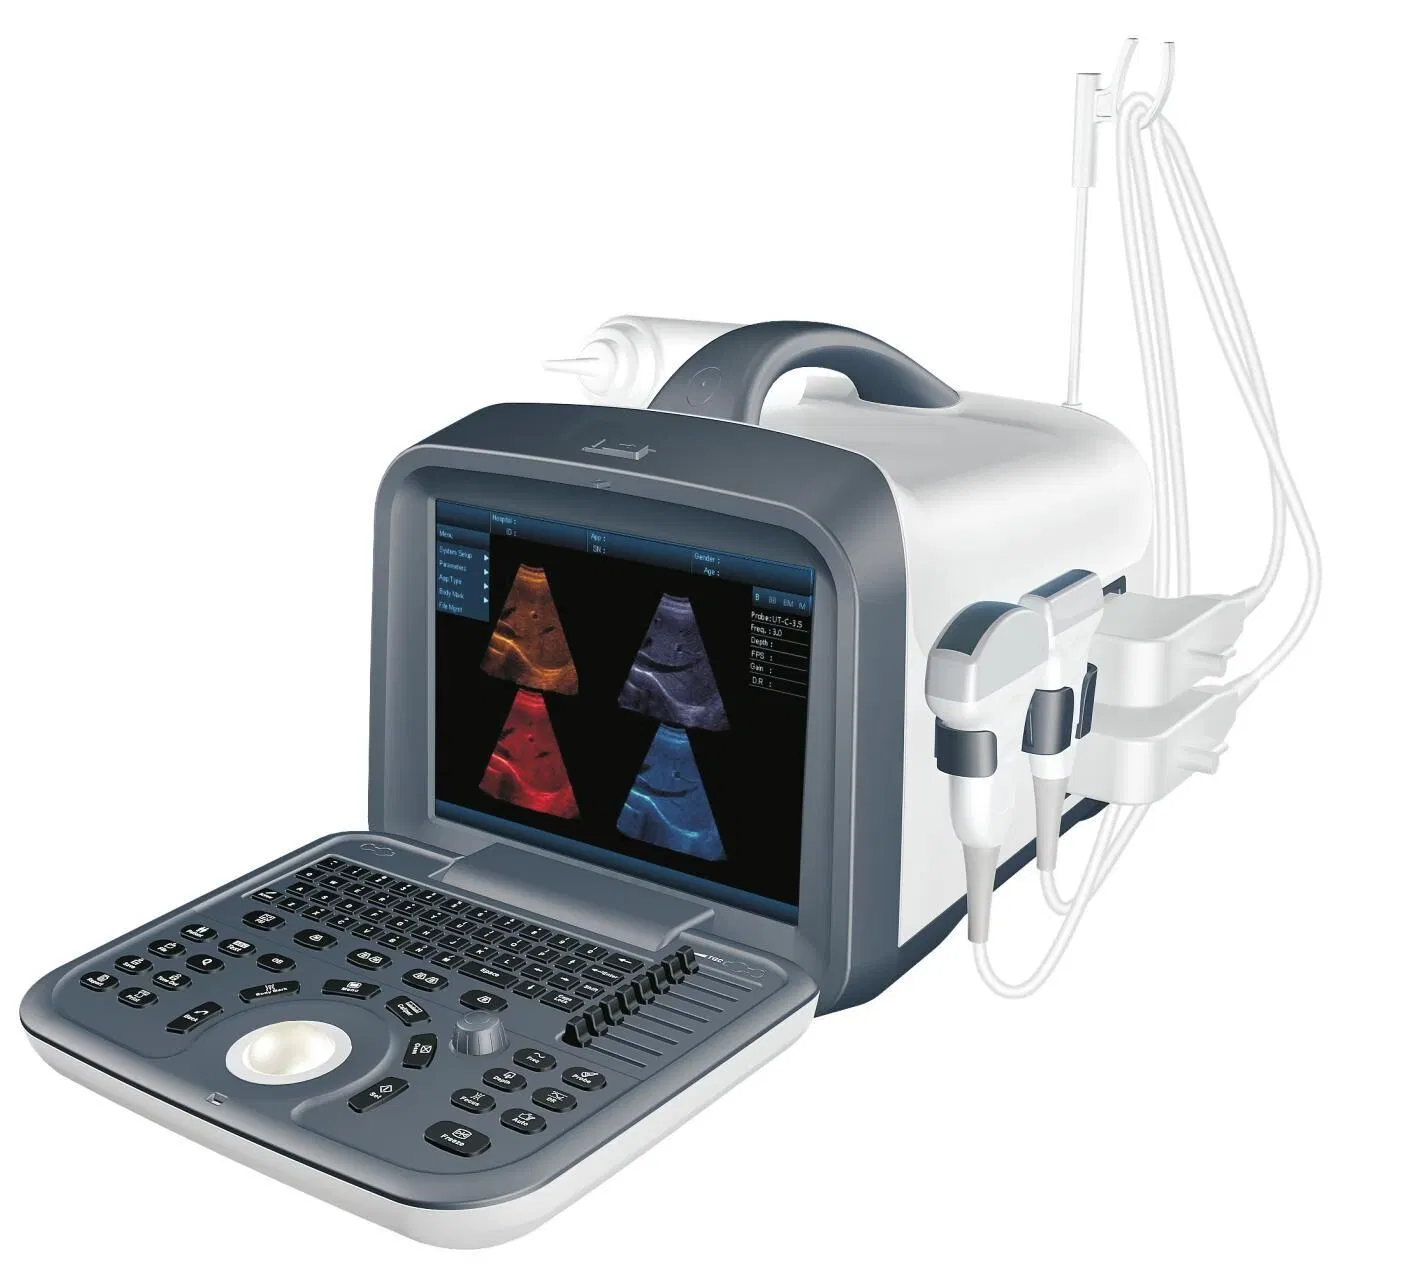 PT6602 Portable Ultrasound Ultrasonic Diagnostic System, All Digital B/W Ultrasound System with High Quality